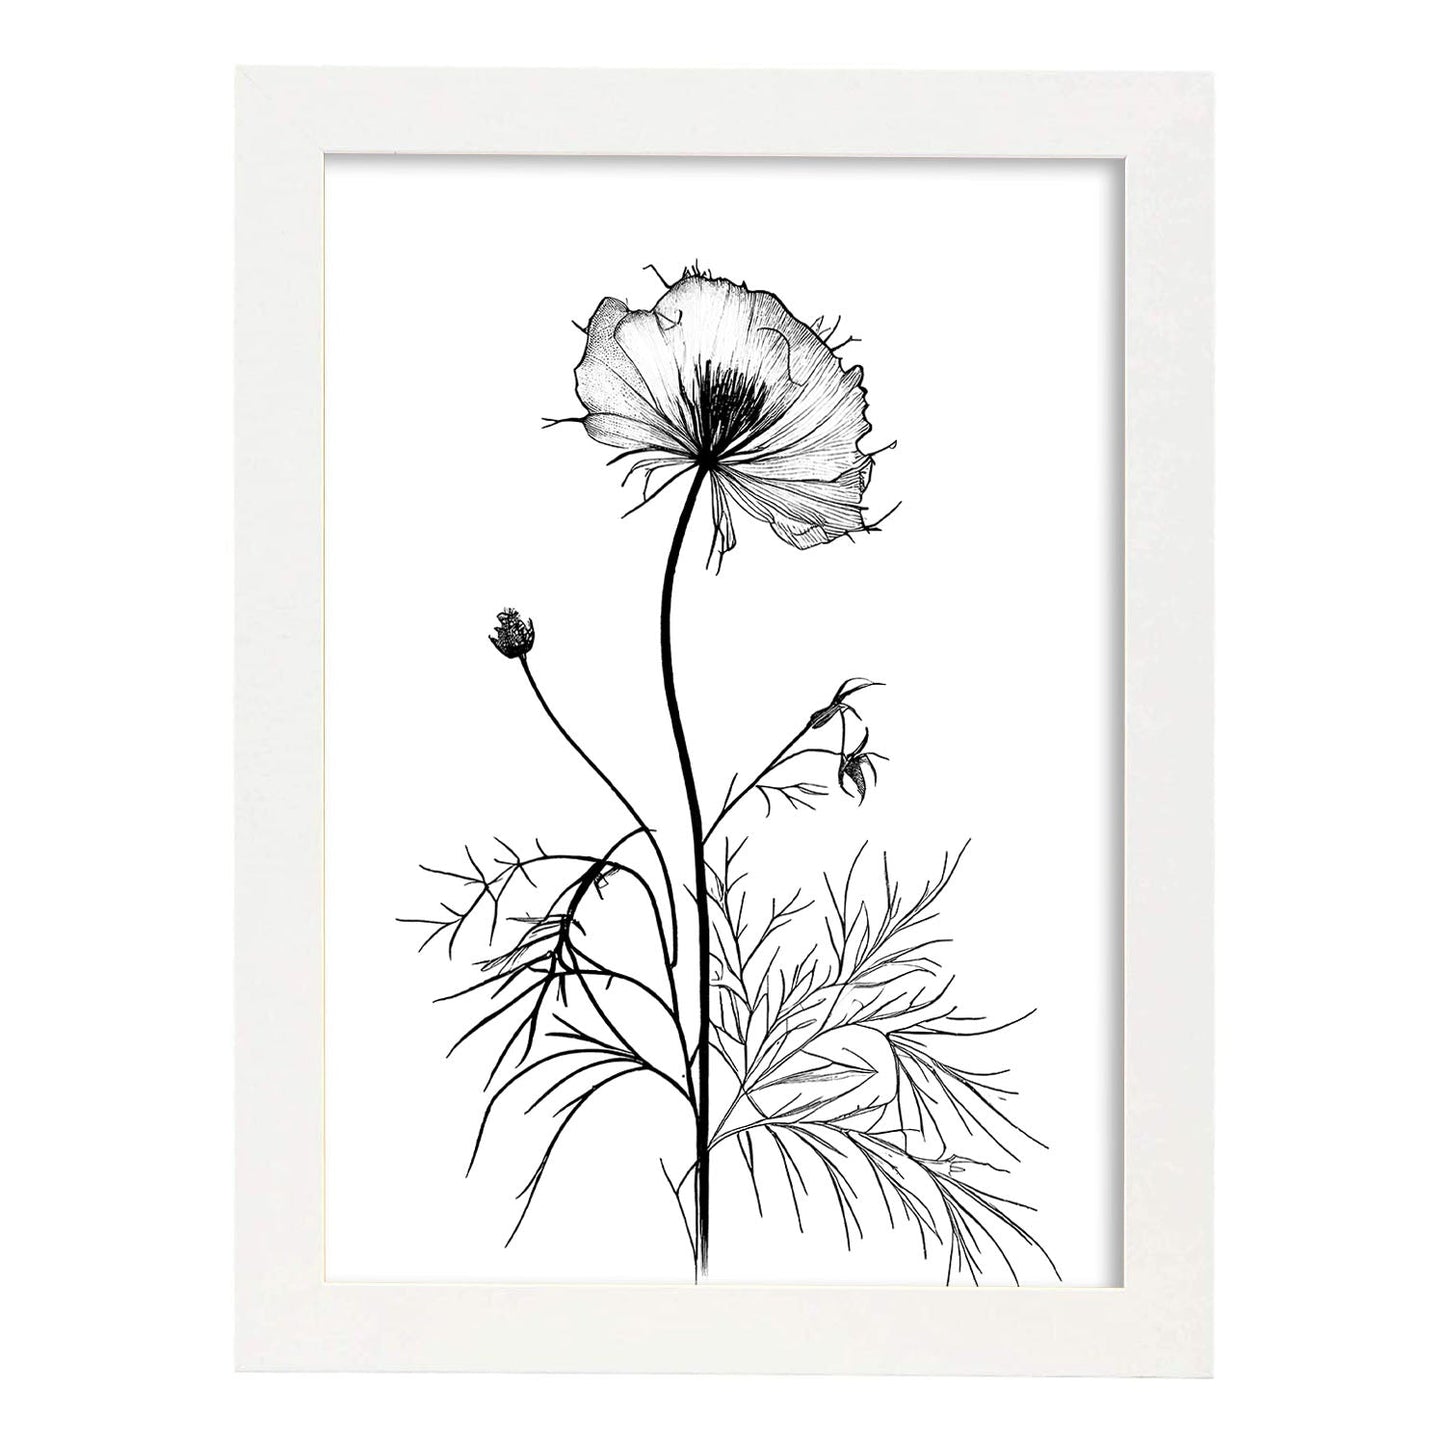 Nacnic Love-in-a-Mist Minimalist Line Art_1. Aesthetic Wall Art Prints for Bedroom or Living Room Design.